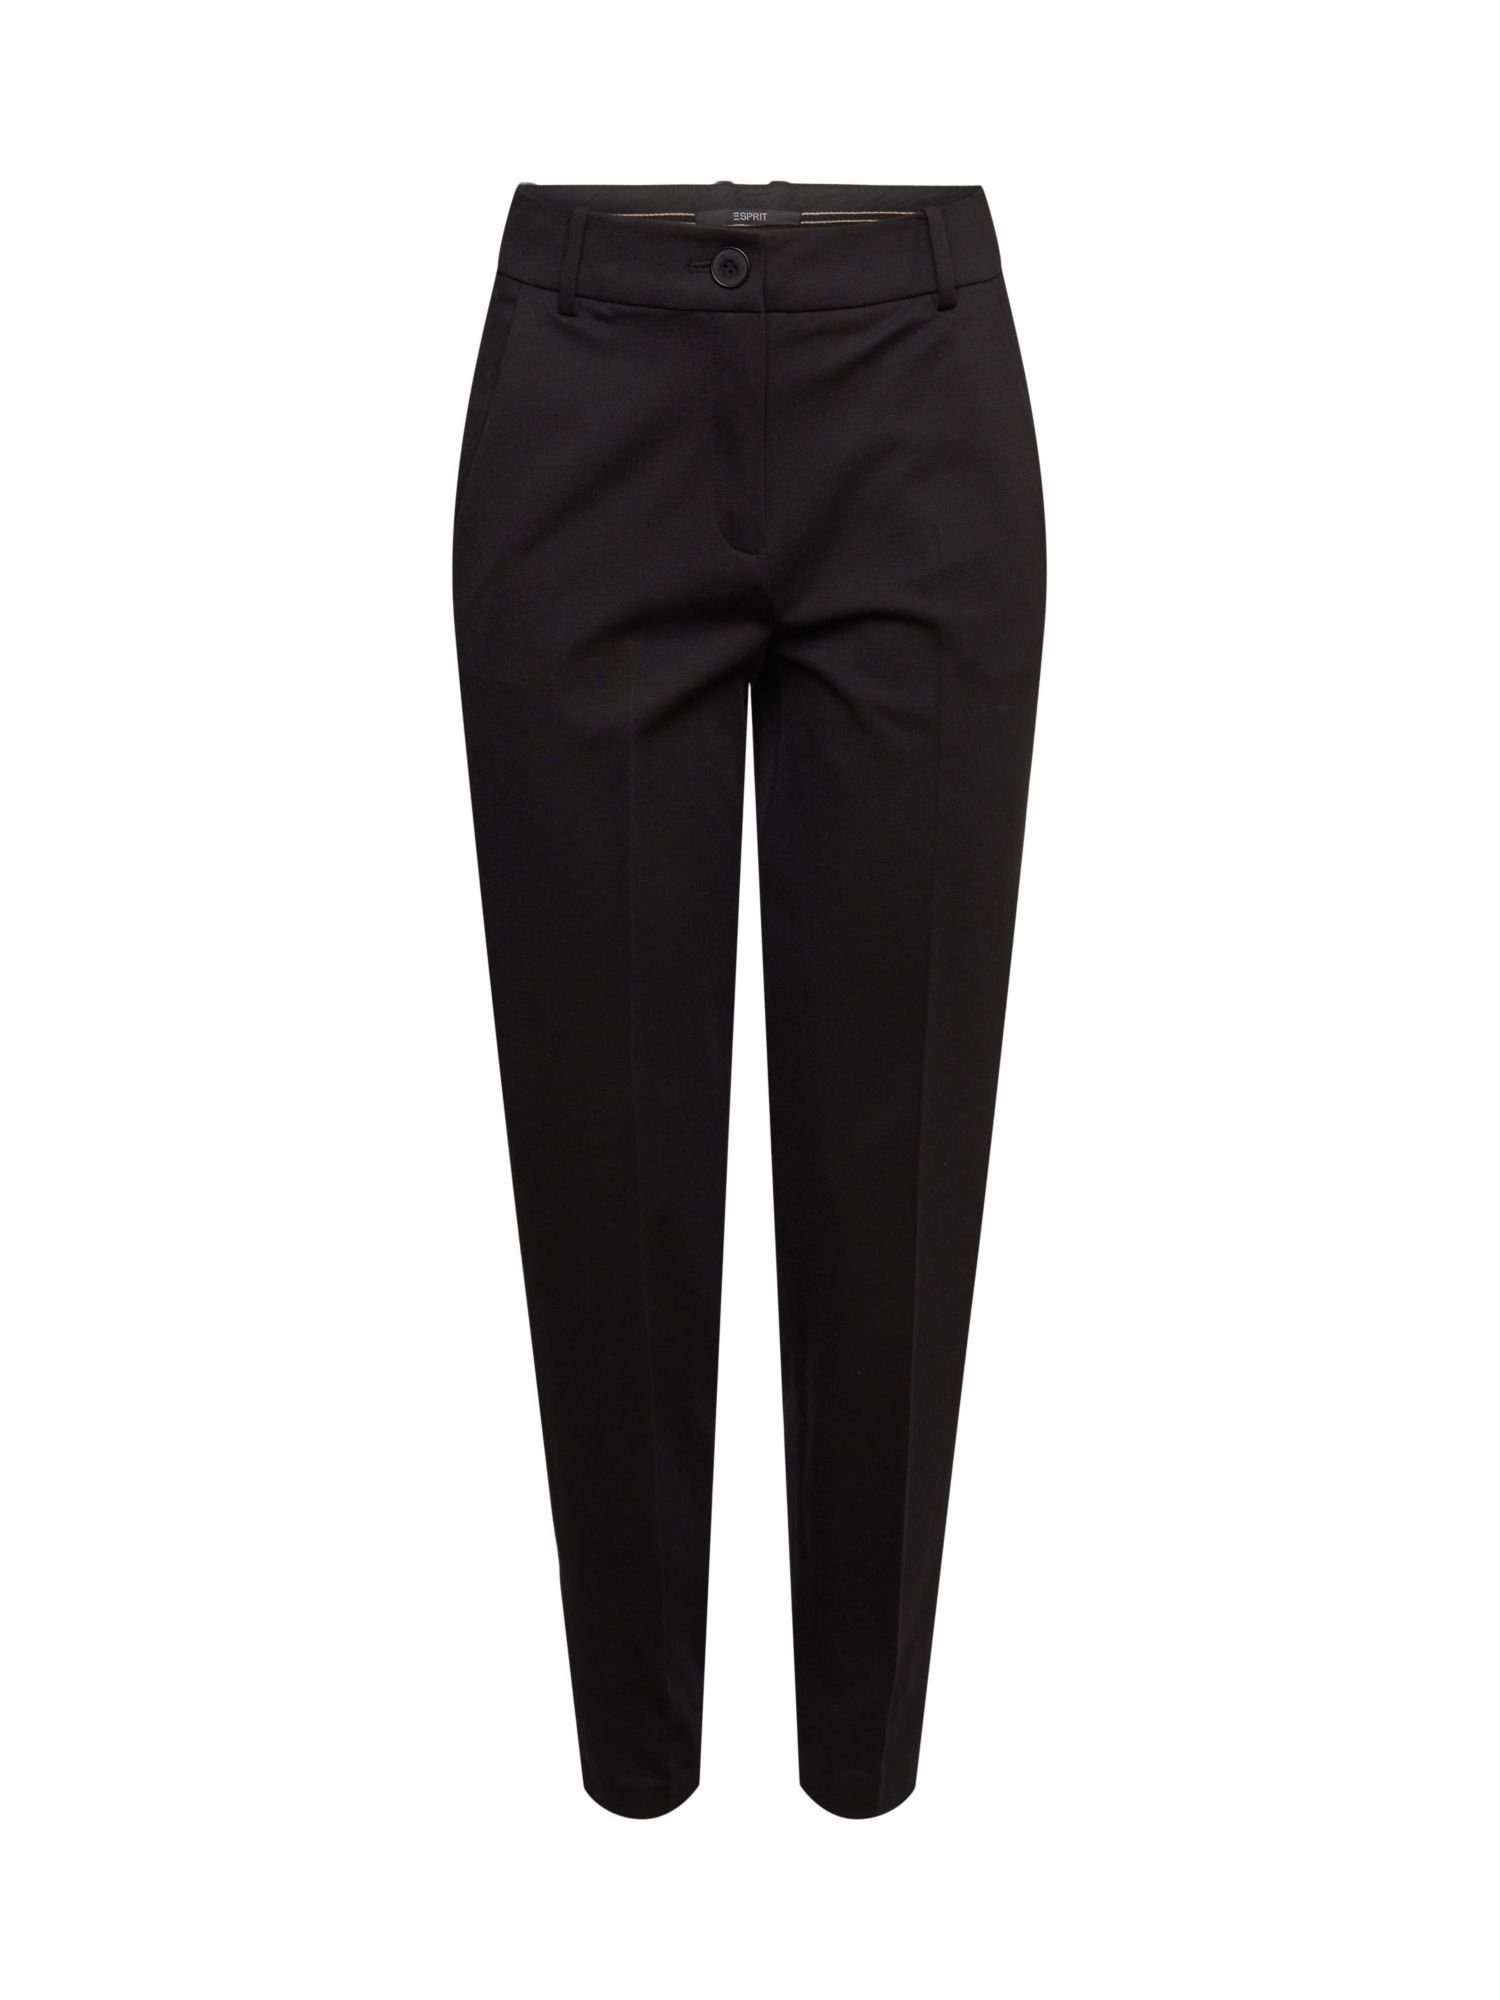 Pants BLACK Tapered SPORTY Mix PUNTO Collection Match & Esprit Stretch-Hose